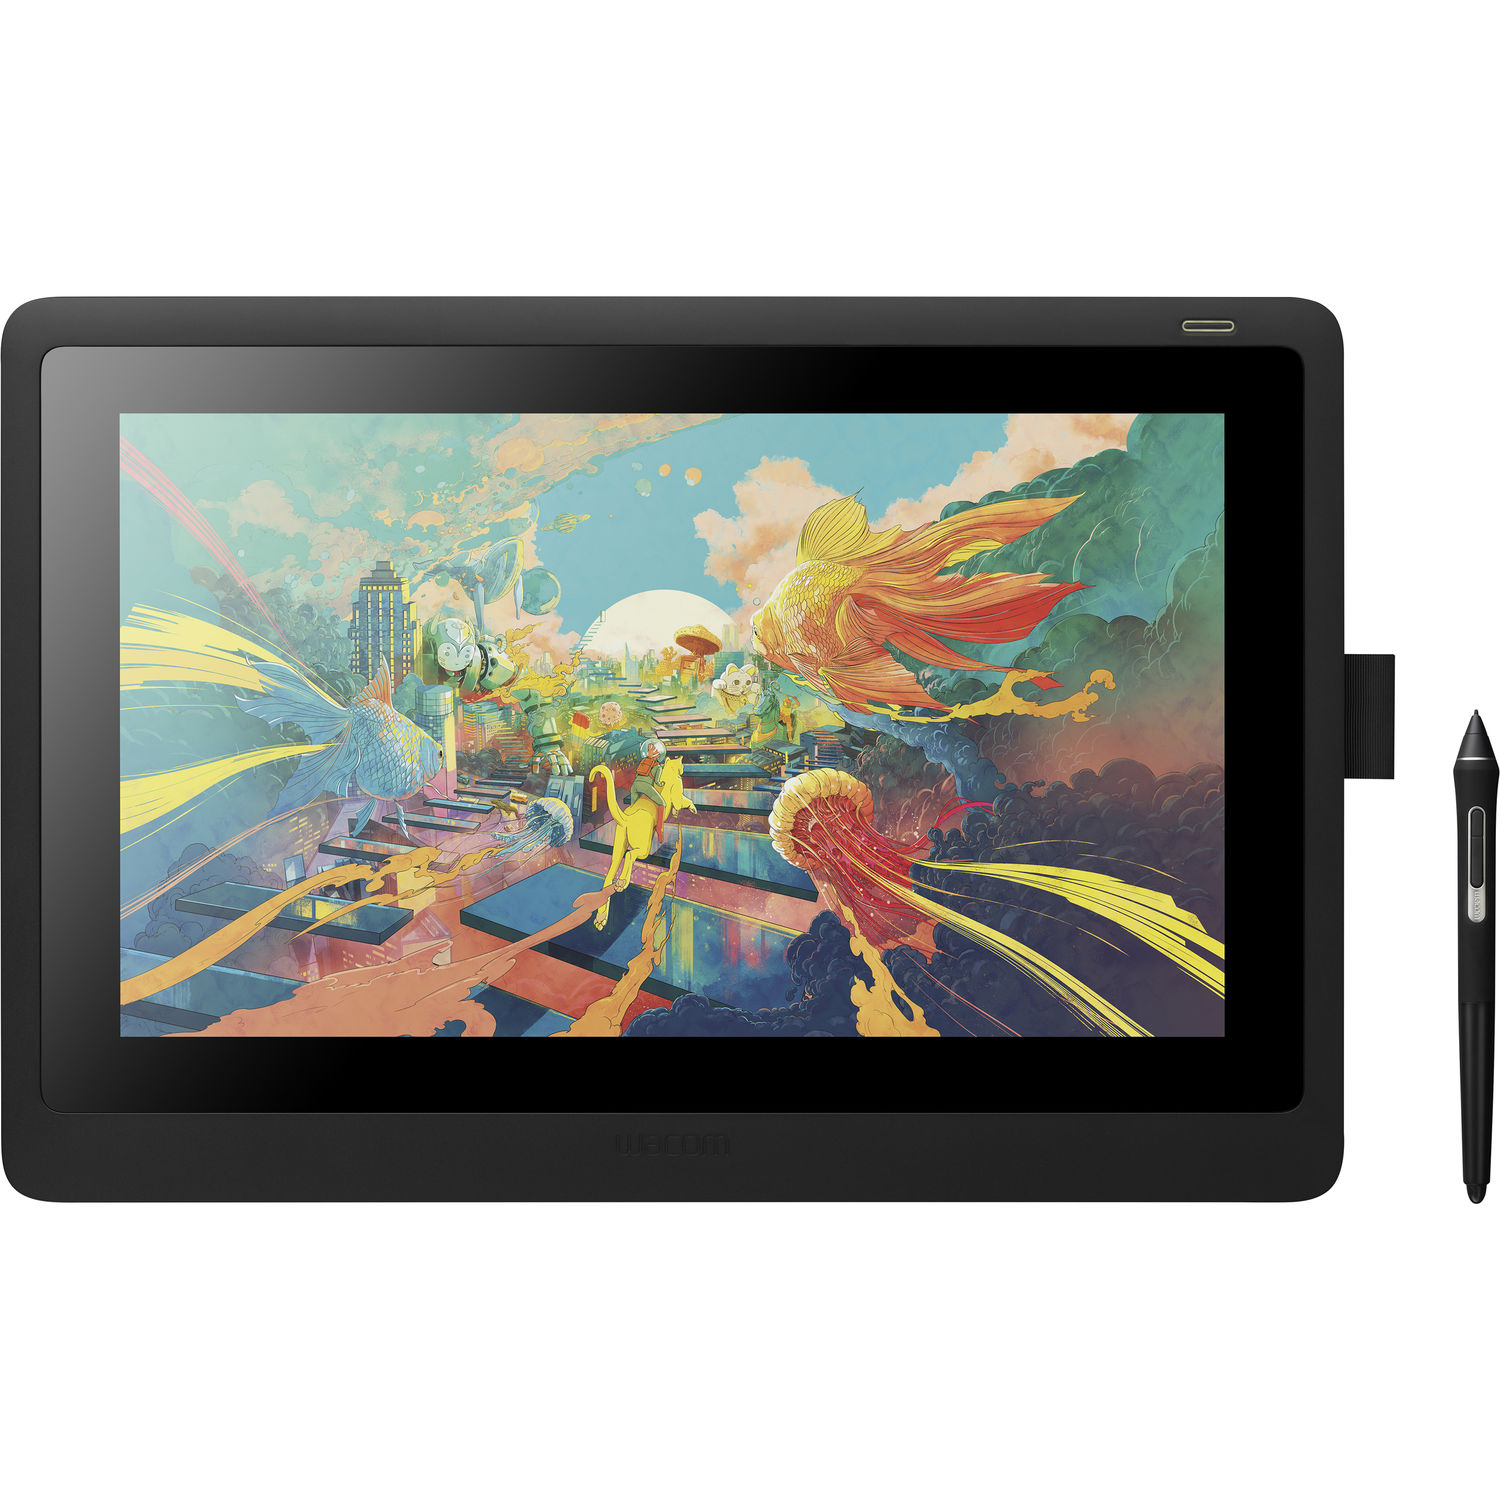 Cintiq 16 Drawing Tablet with Screen (DTK1660K0A) 753218986399 eBay